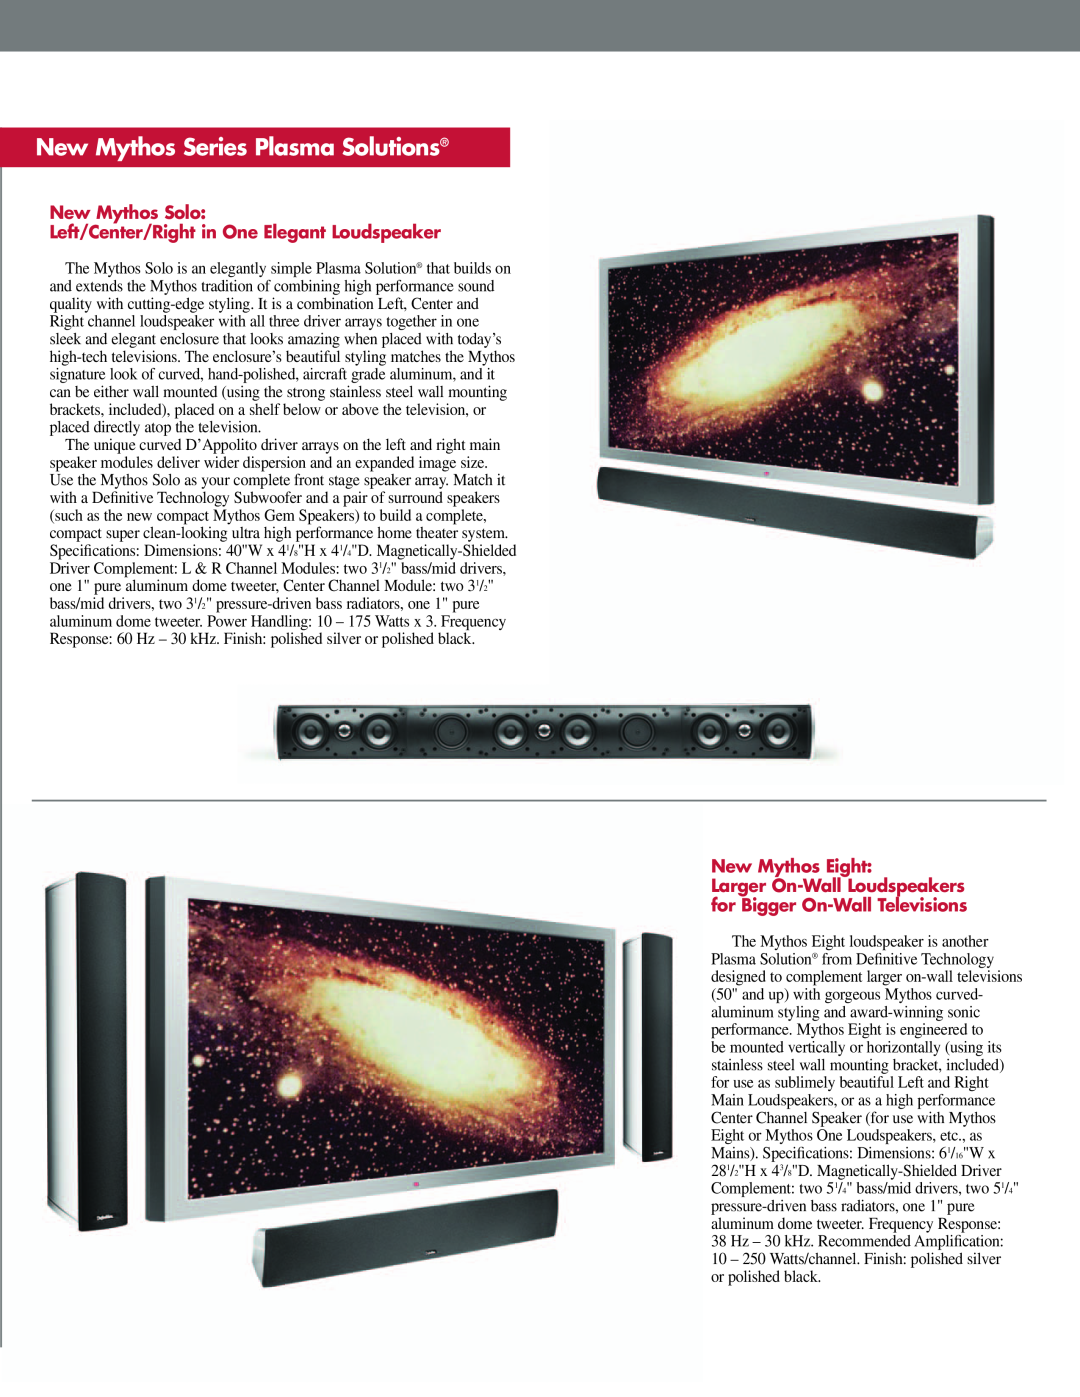 Definitive Technology New Mythos Solo Three-in-One Front Speaker Array manual New Mythos Series Plasma Solutions 